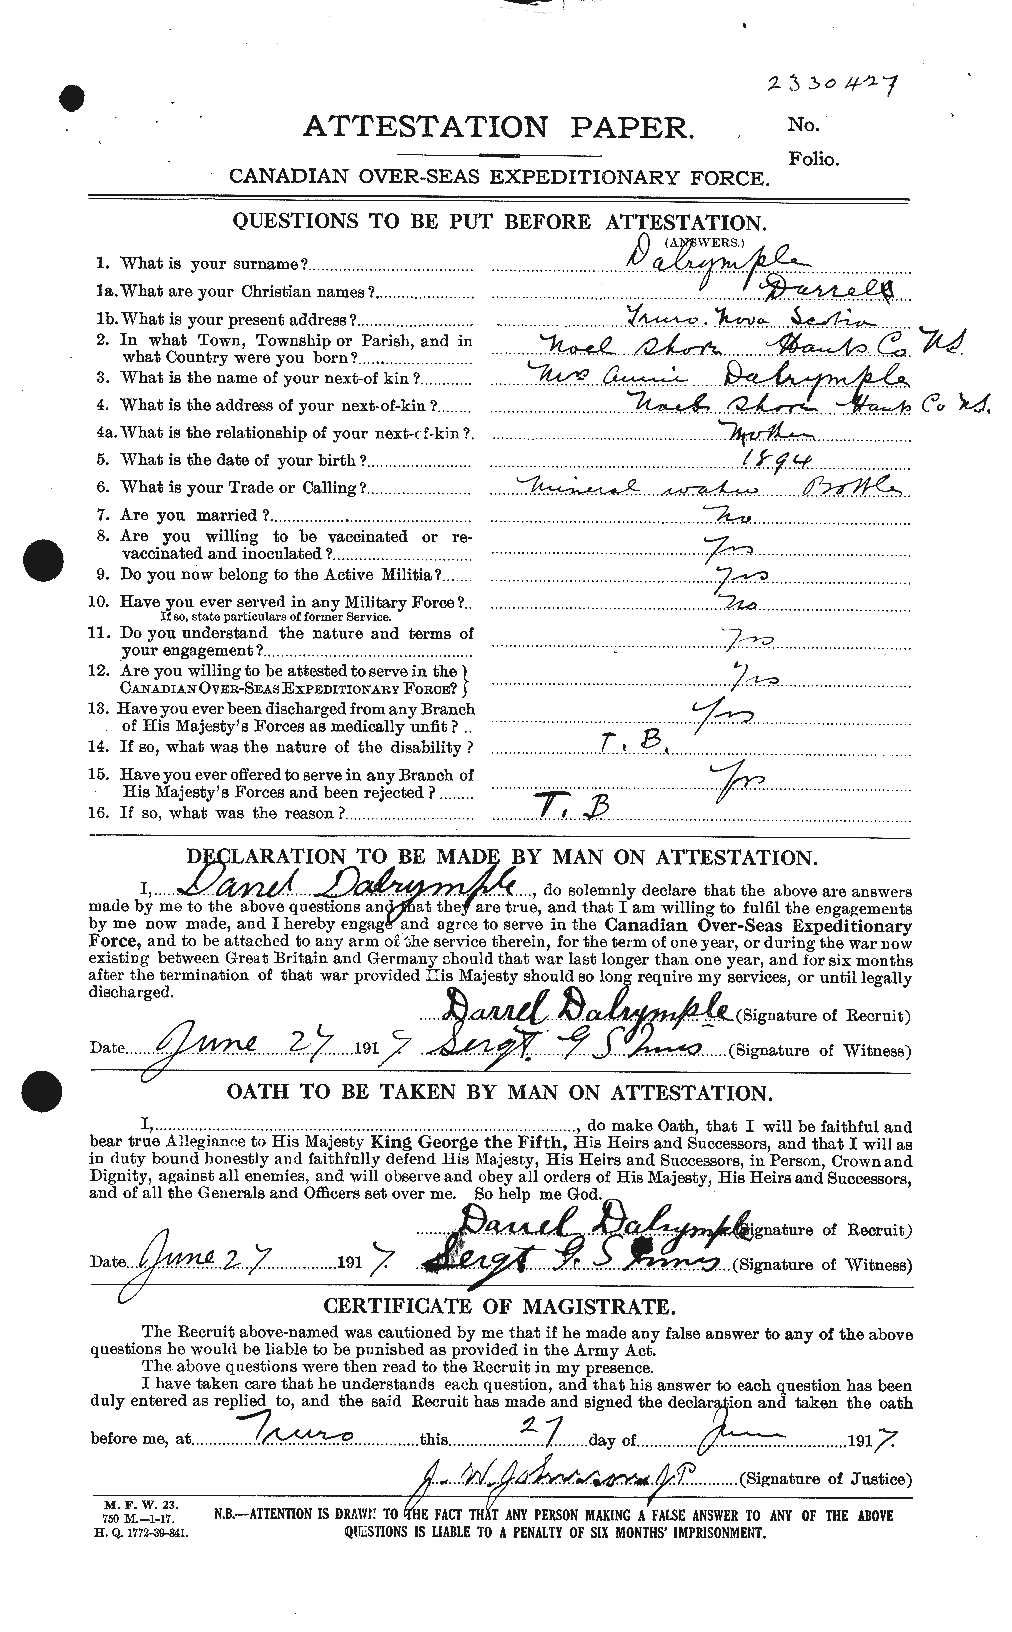 Personnel Records of the First World War - CEF 277626a